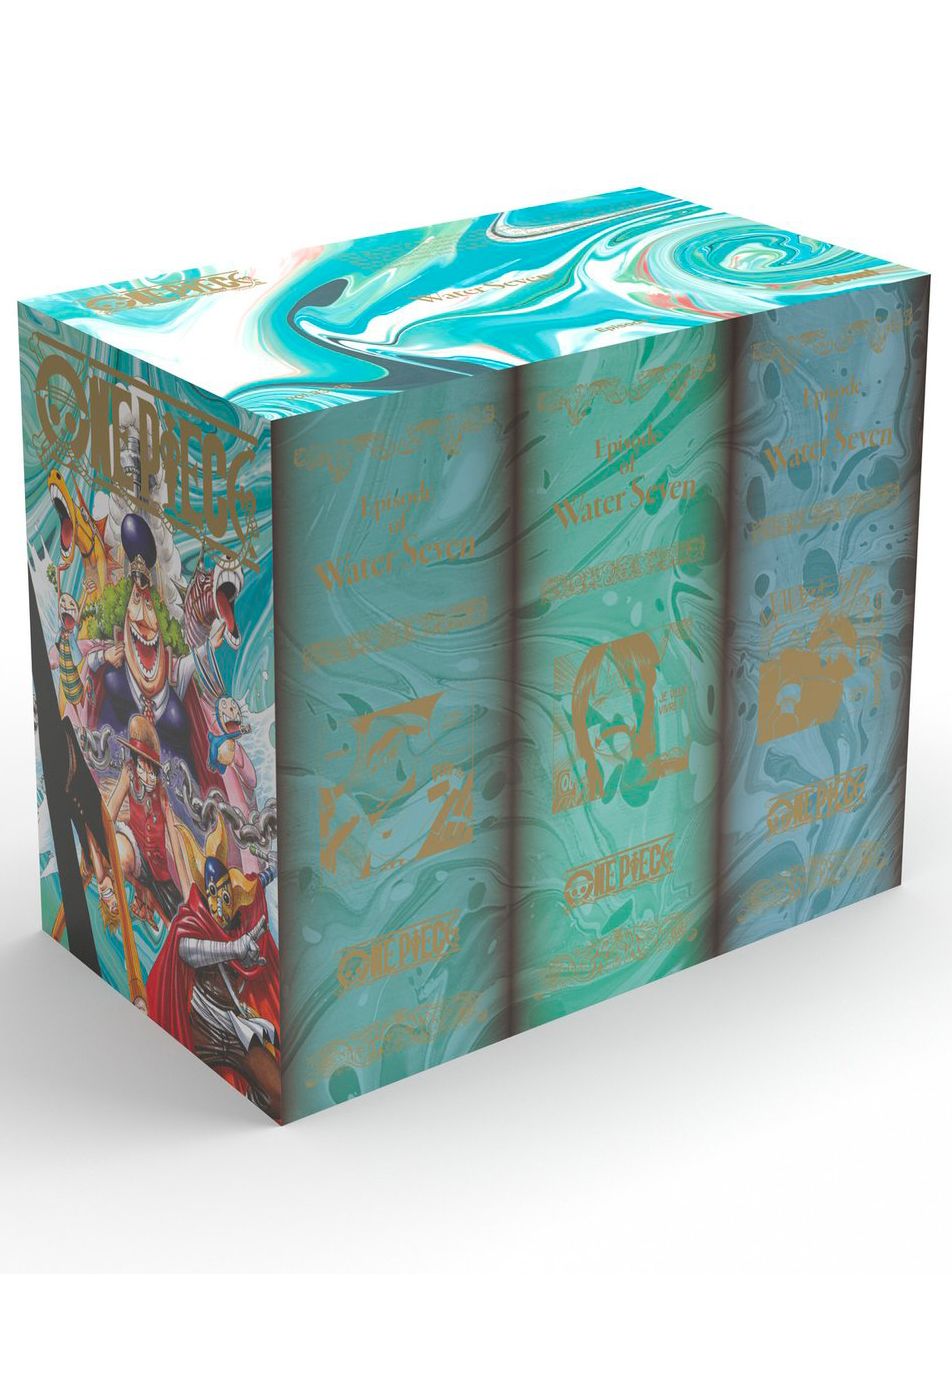 One Piece - Coffret 4 Water Seven (tomes 33 A 45)